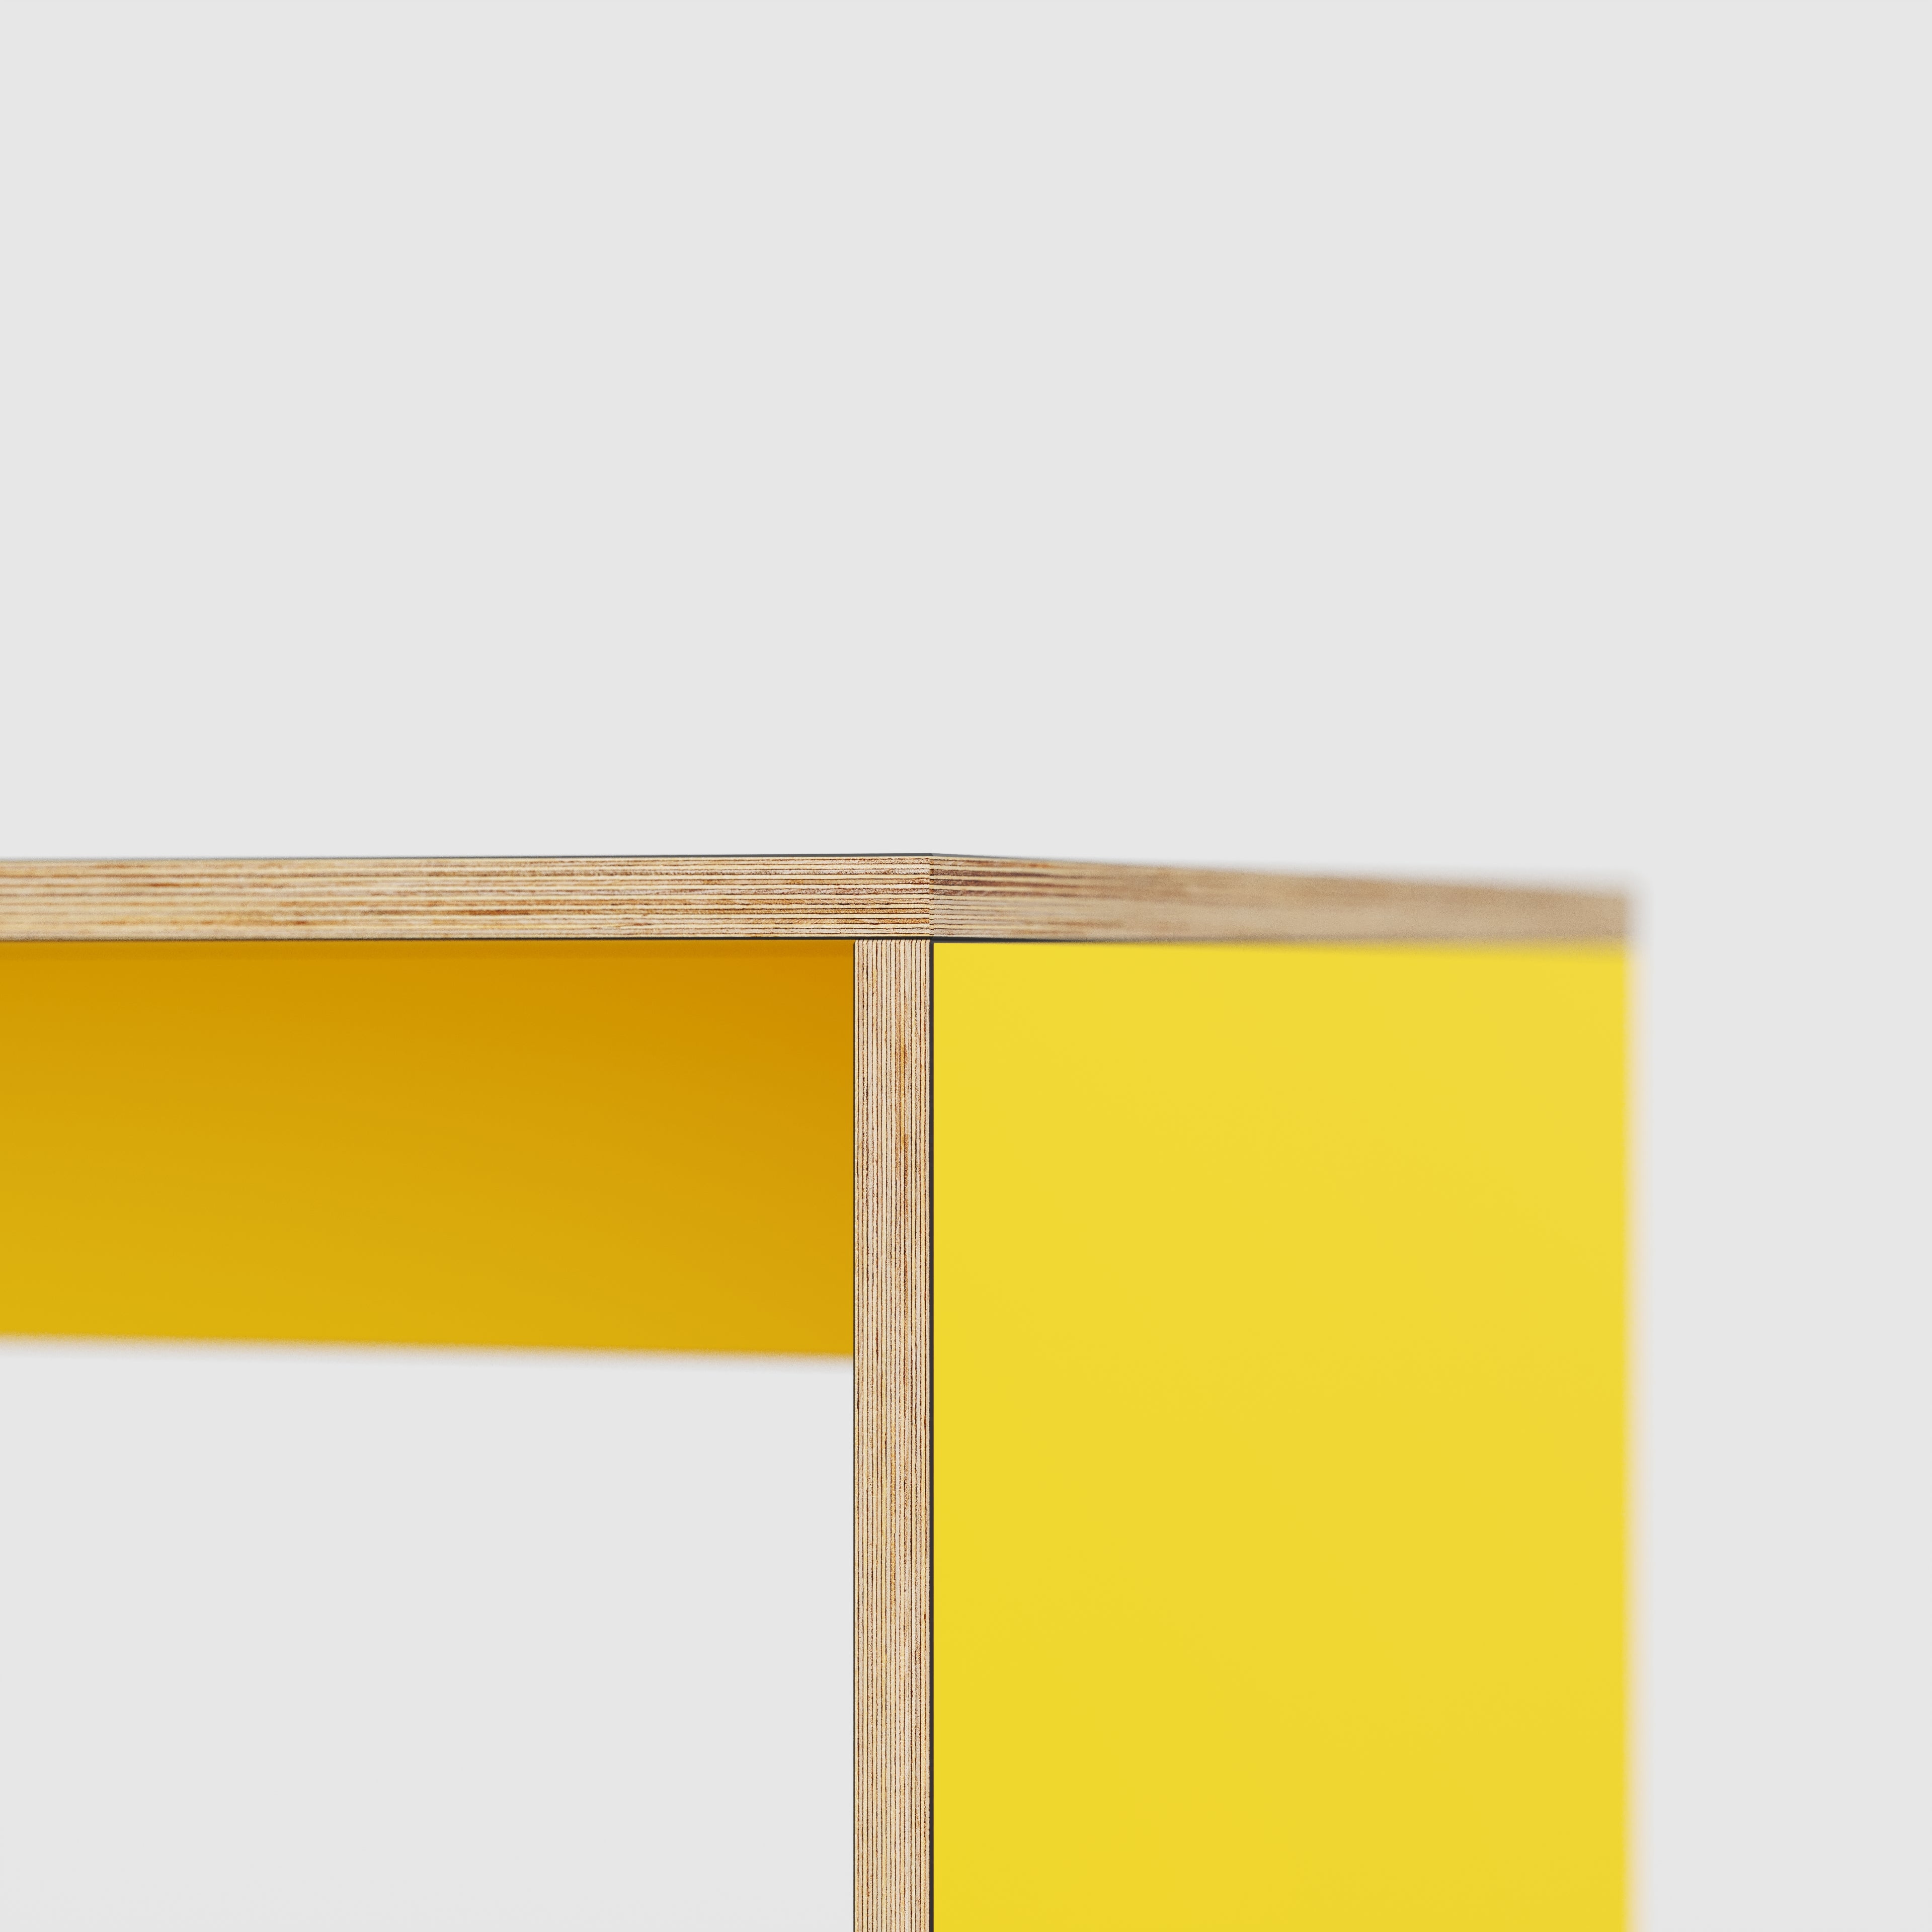 Kids Desk with Solid Sides - Formica Chrome Yellow - 800(w) x 400(d) x 500(h)